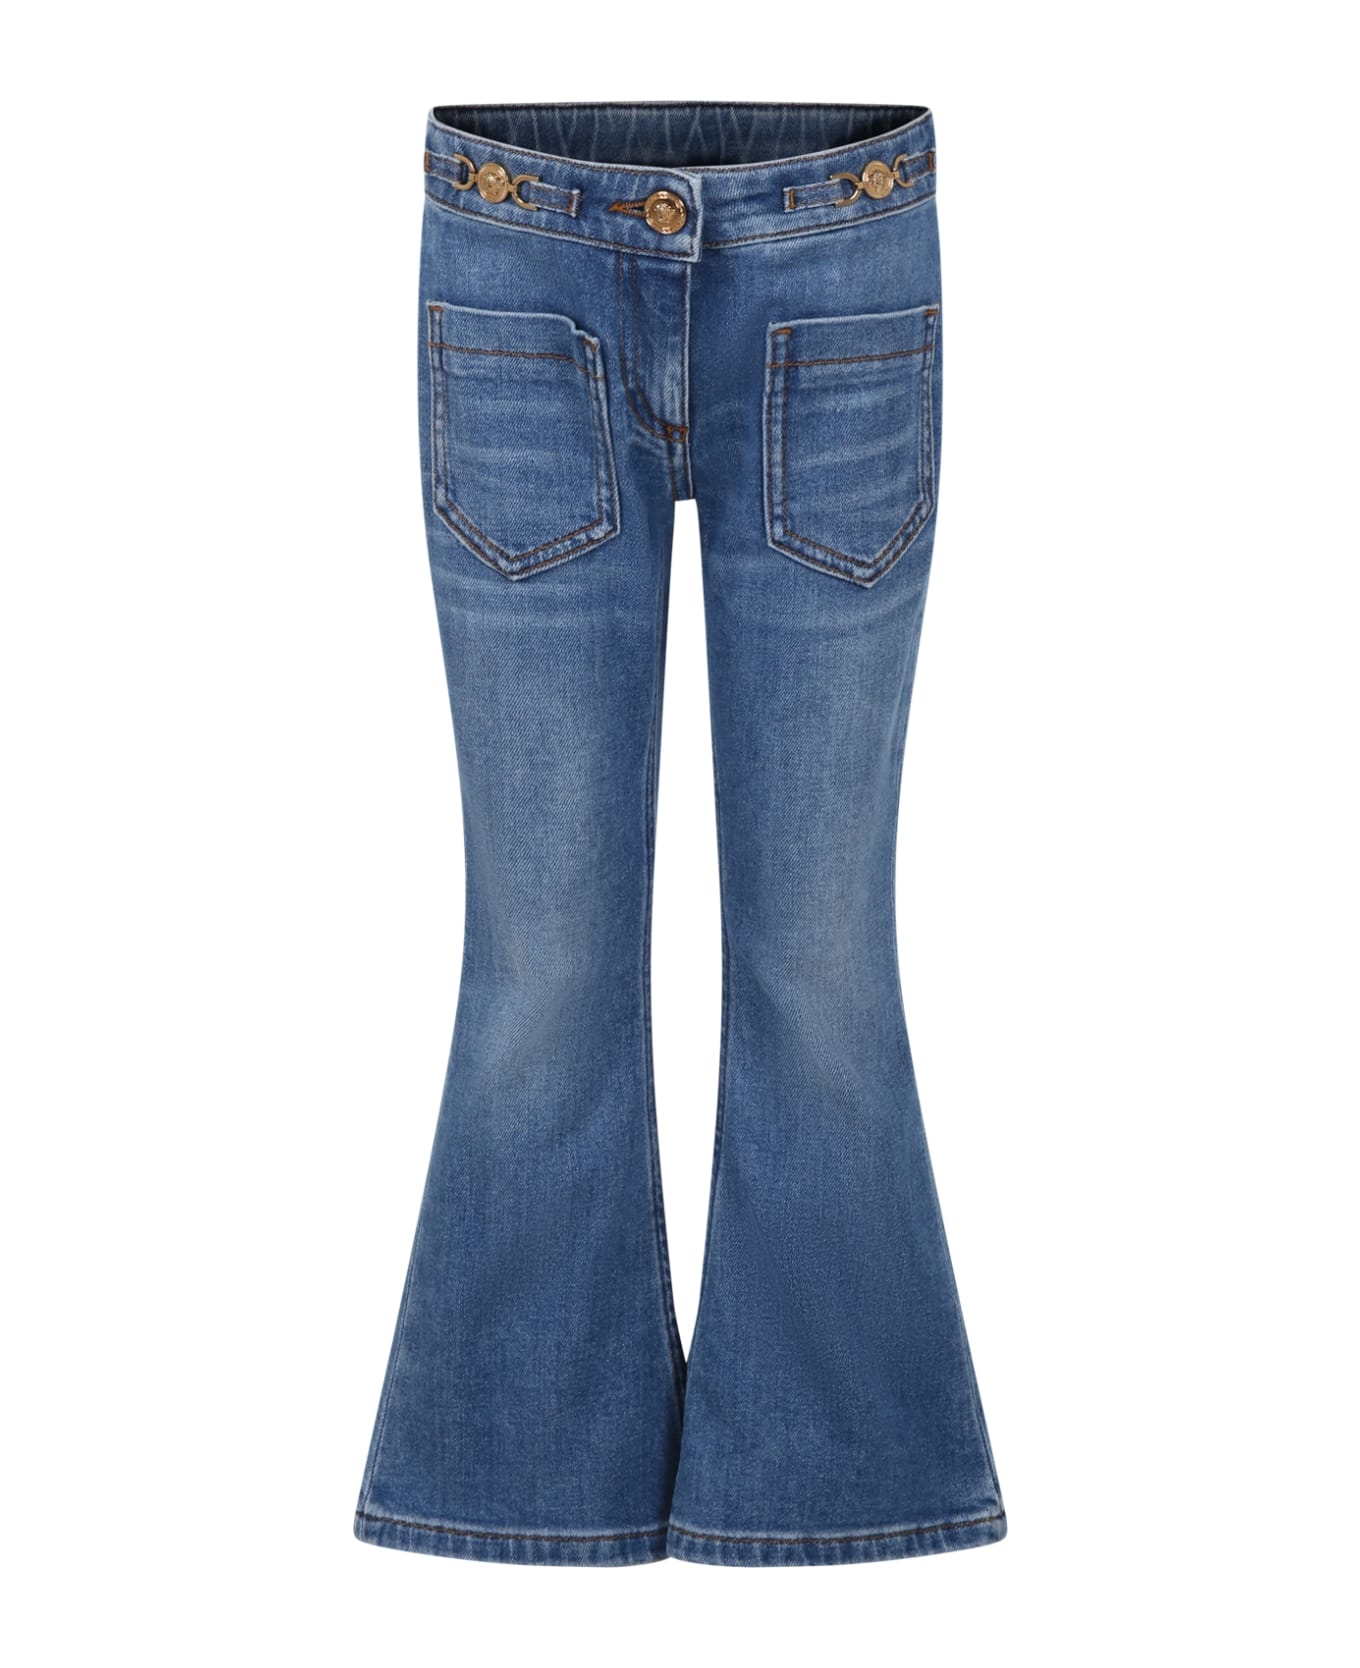 Versace Jeans For Girl With Golden Inserts - Denim ボトムス